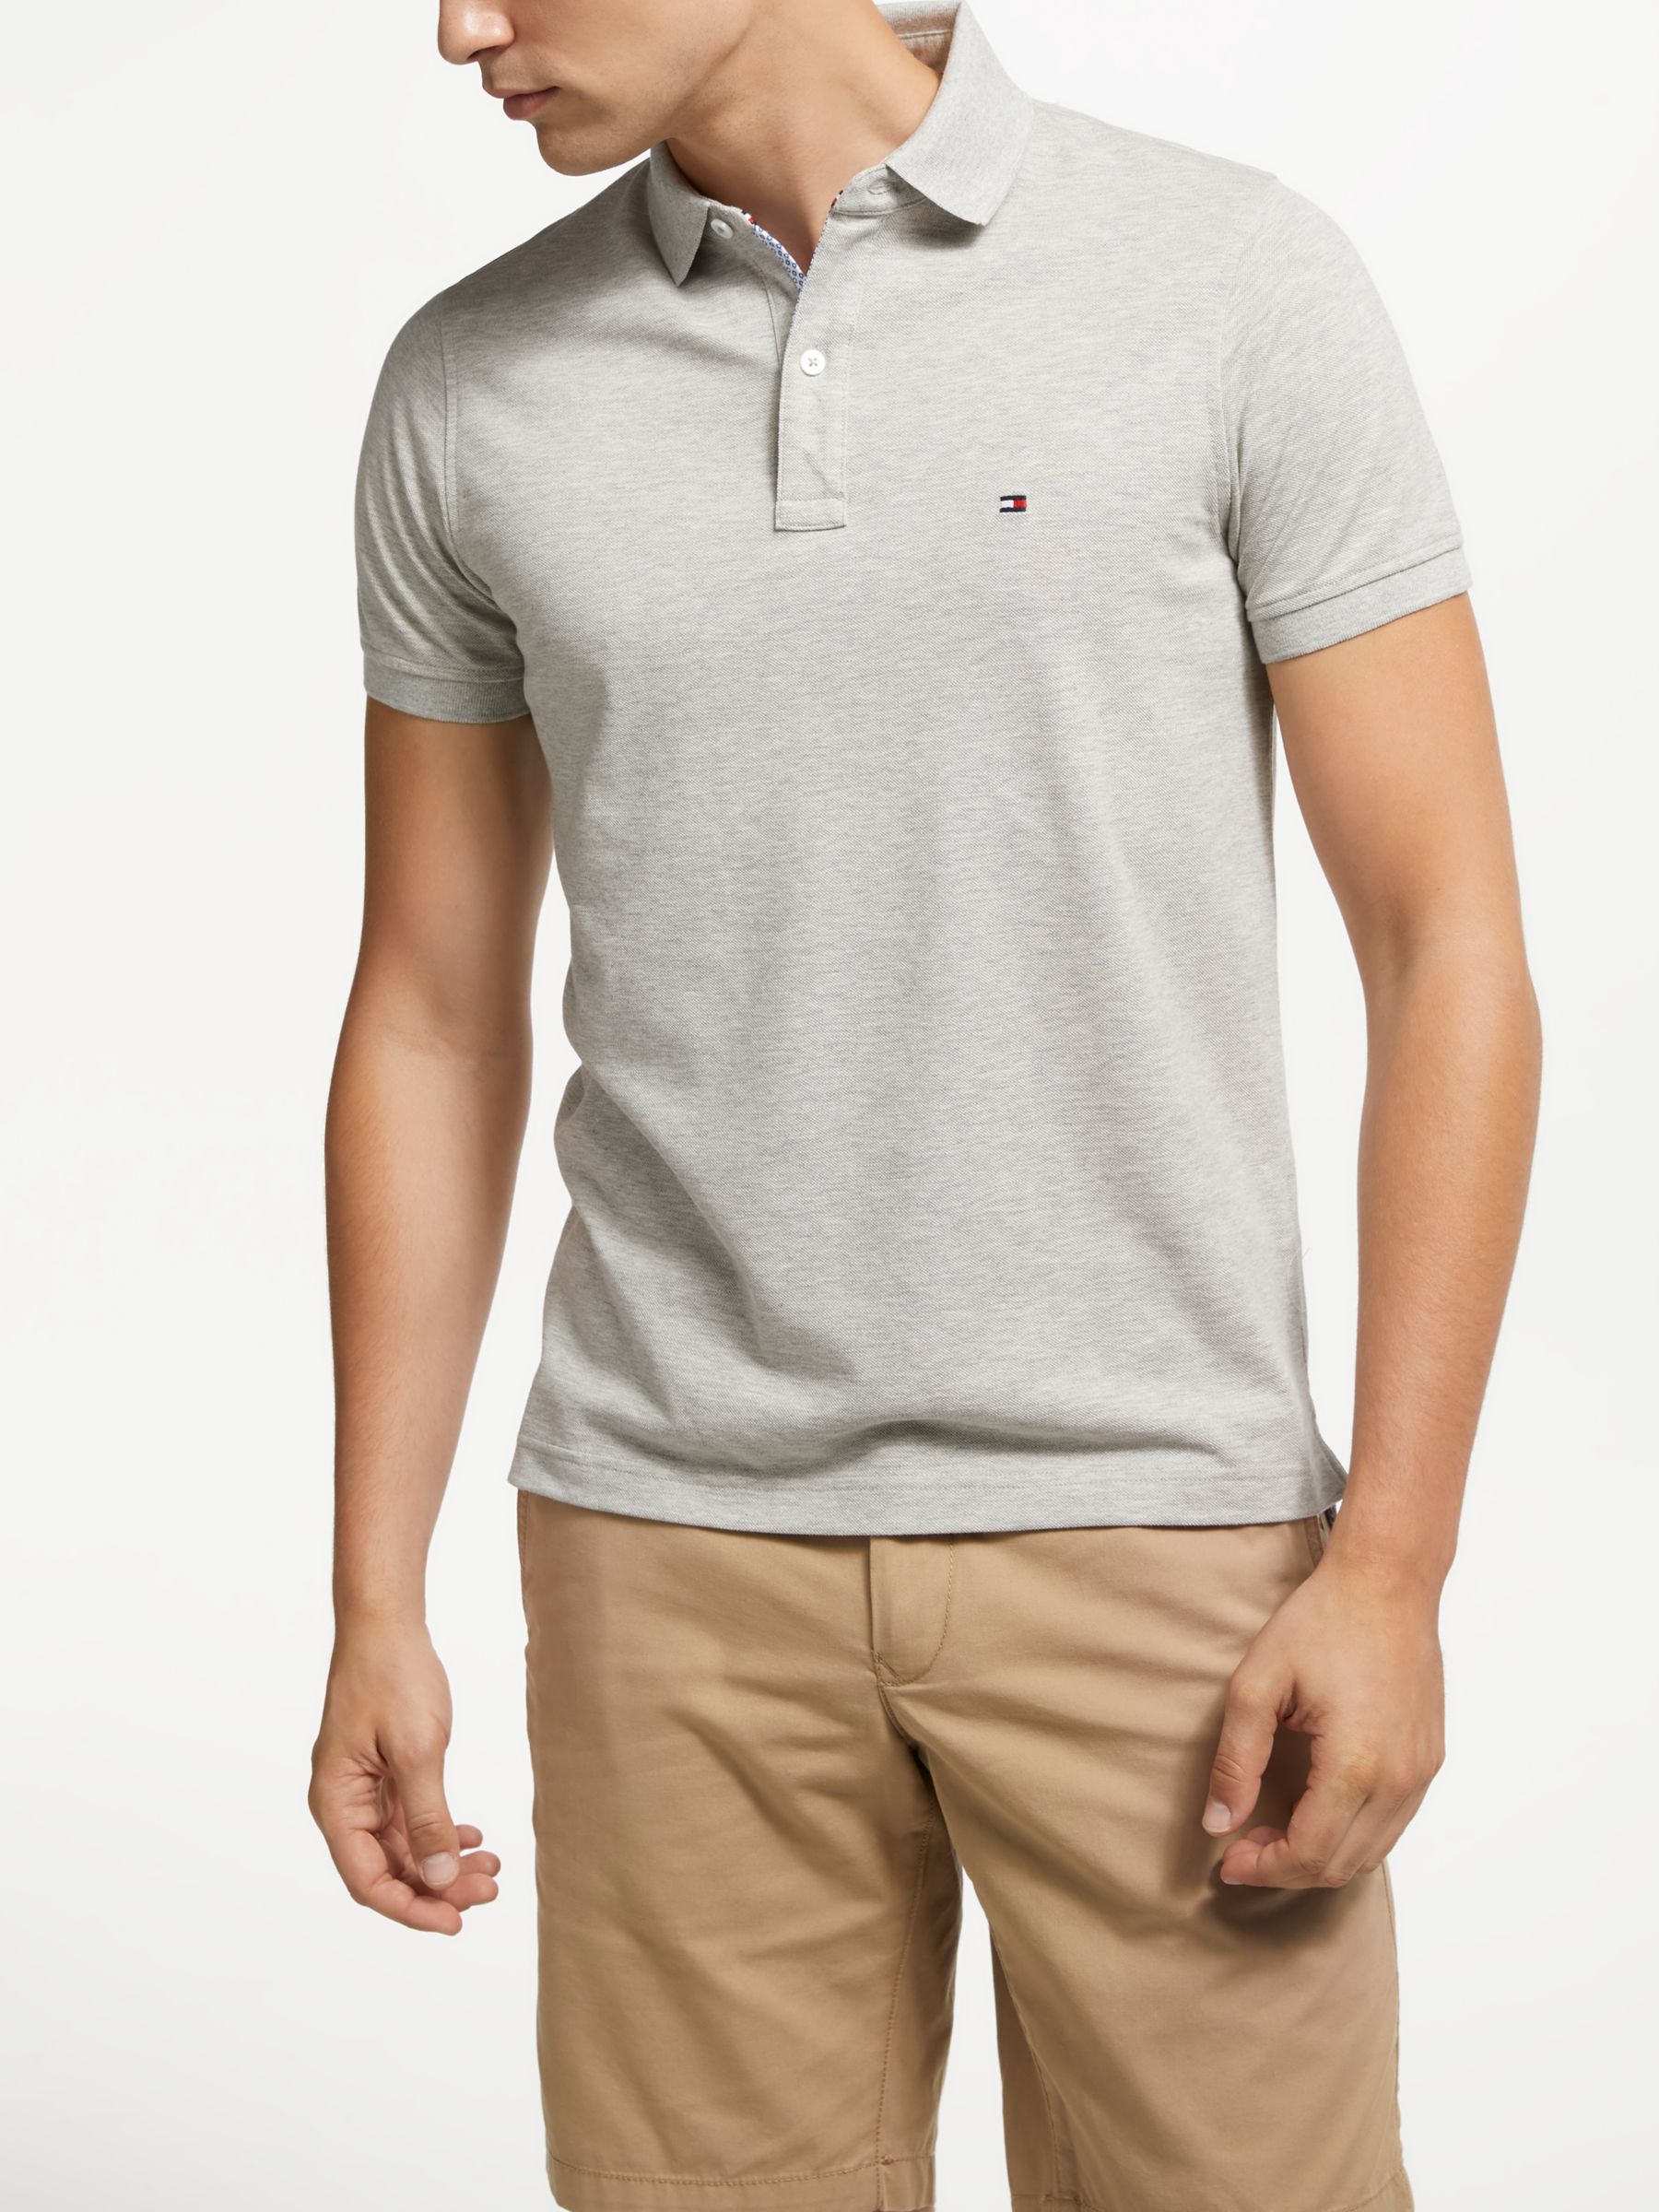 grey tommy hilfiger polo Cheaper Than 